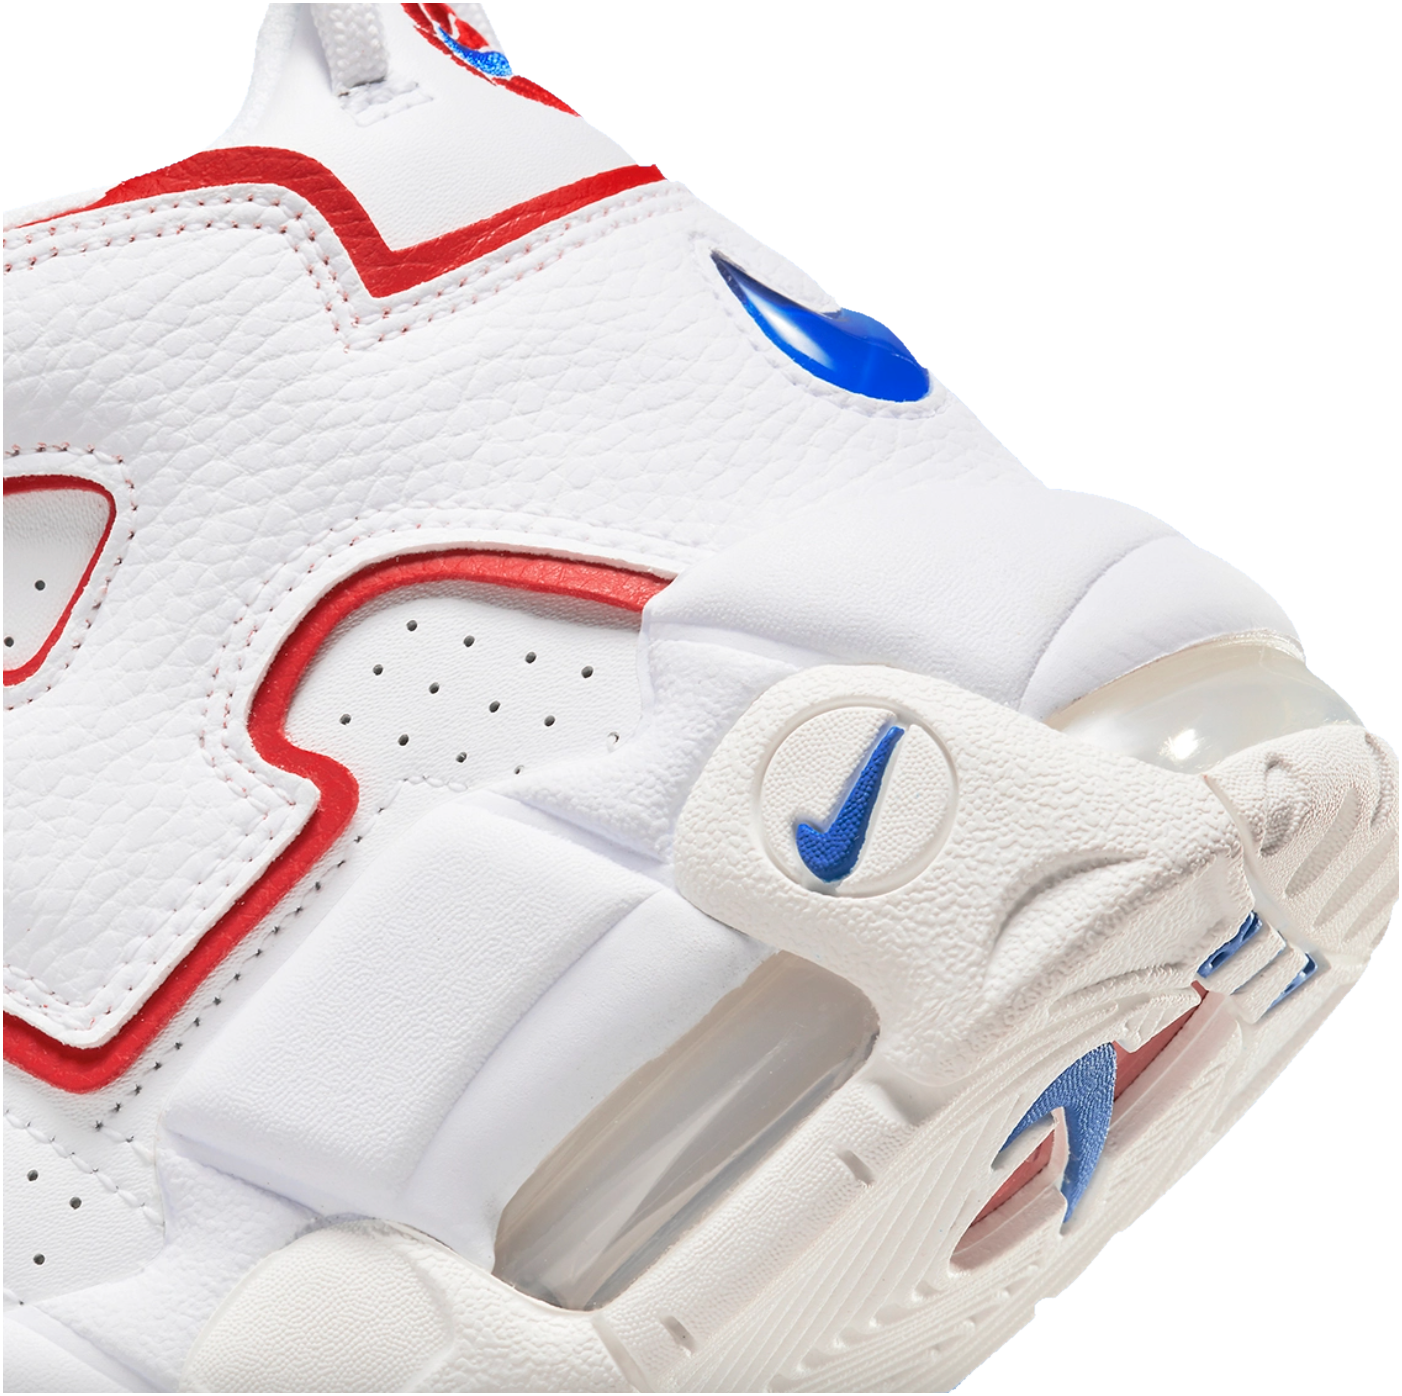 Nike Air More Uptempo White Red Blue DX2662-100